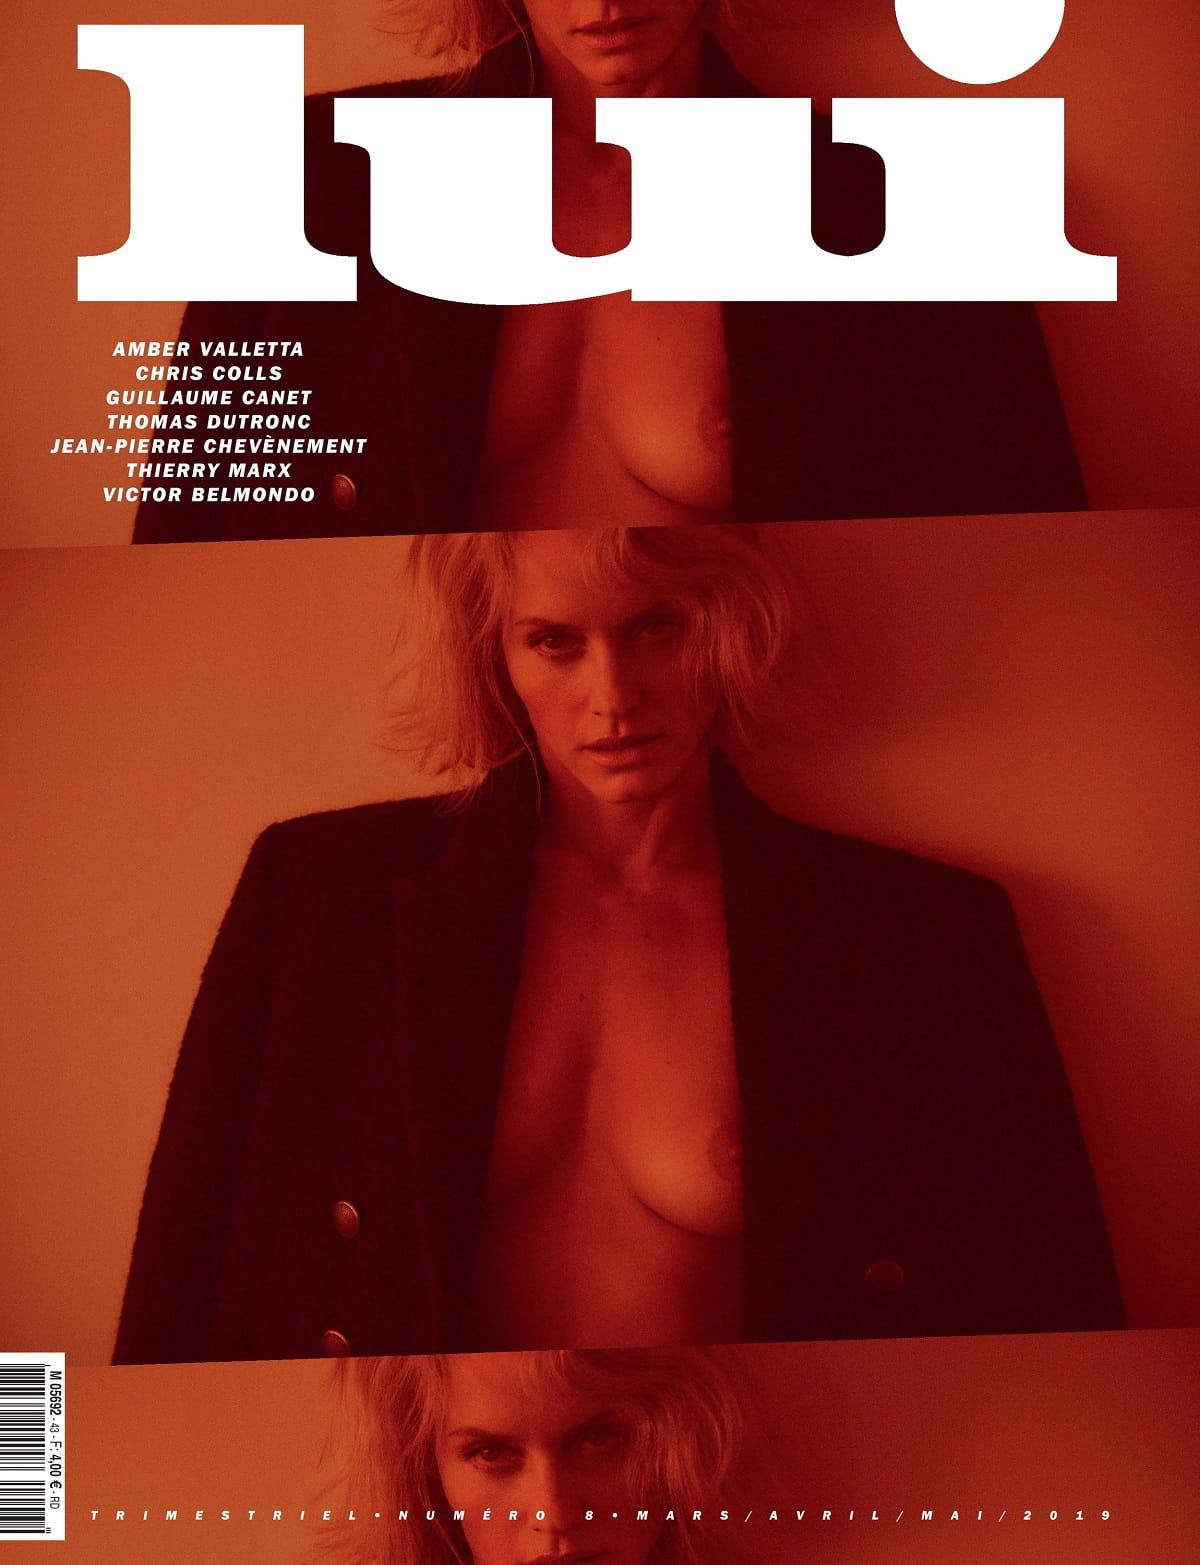 Amber Valletta In Saint Laurent By Chris Colls For Lui Magazine France